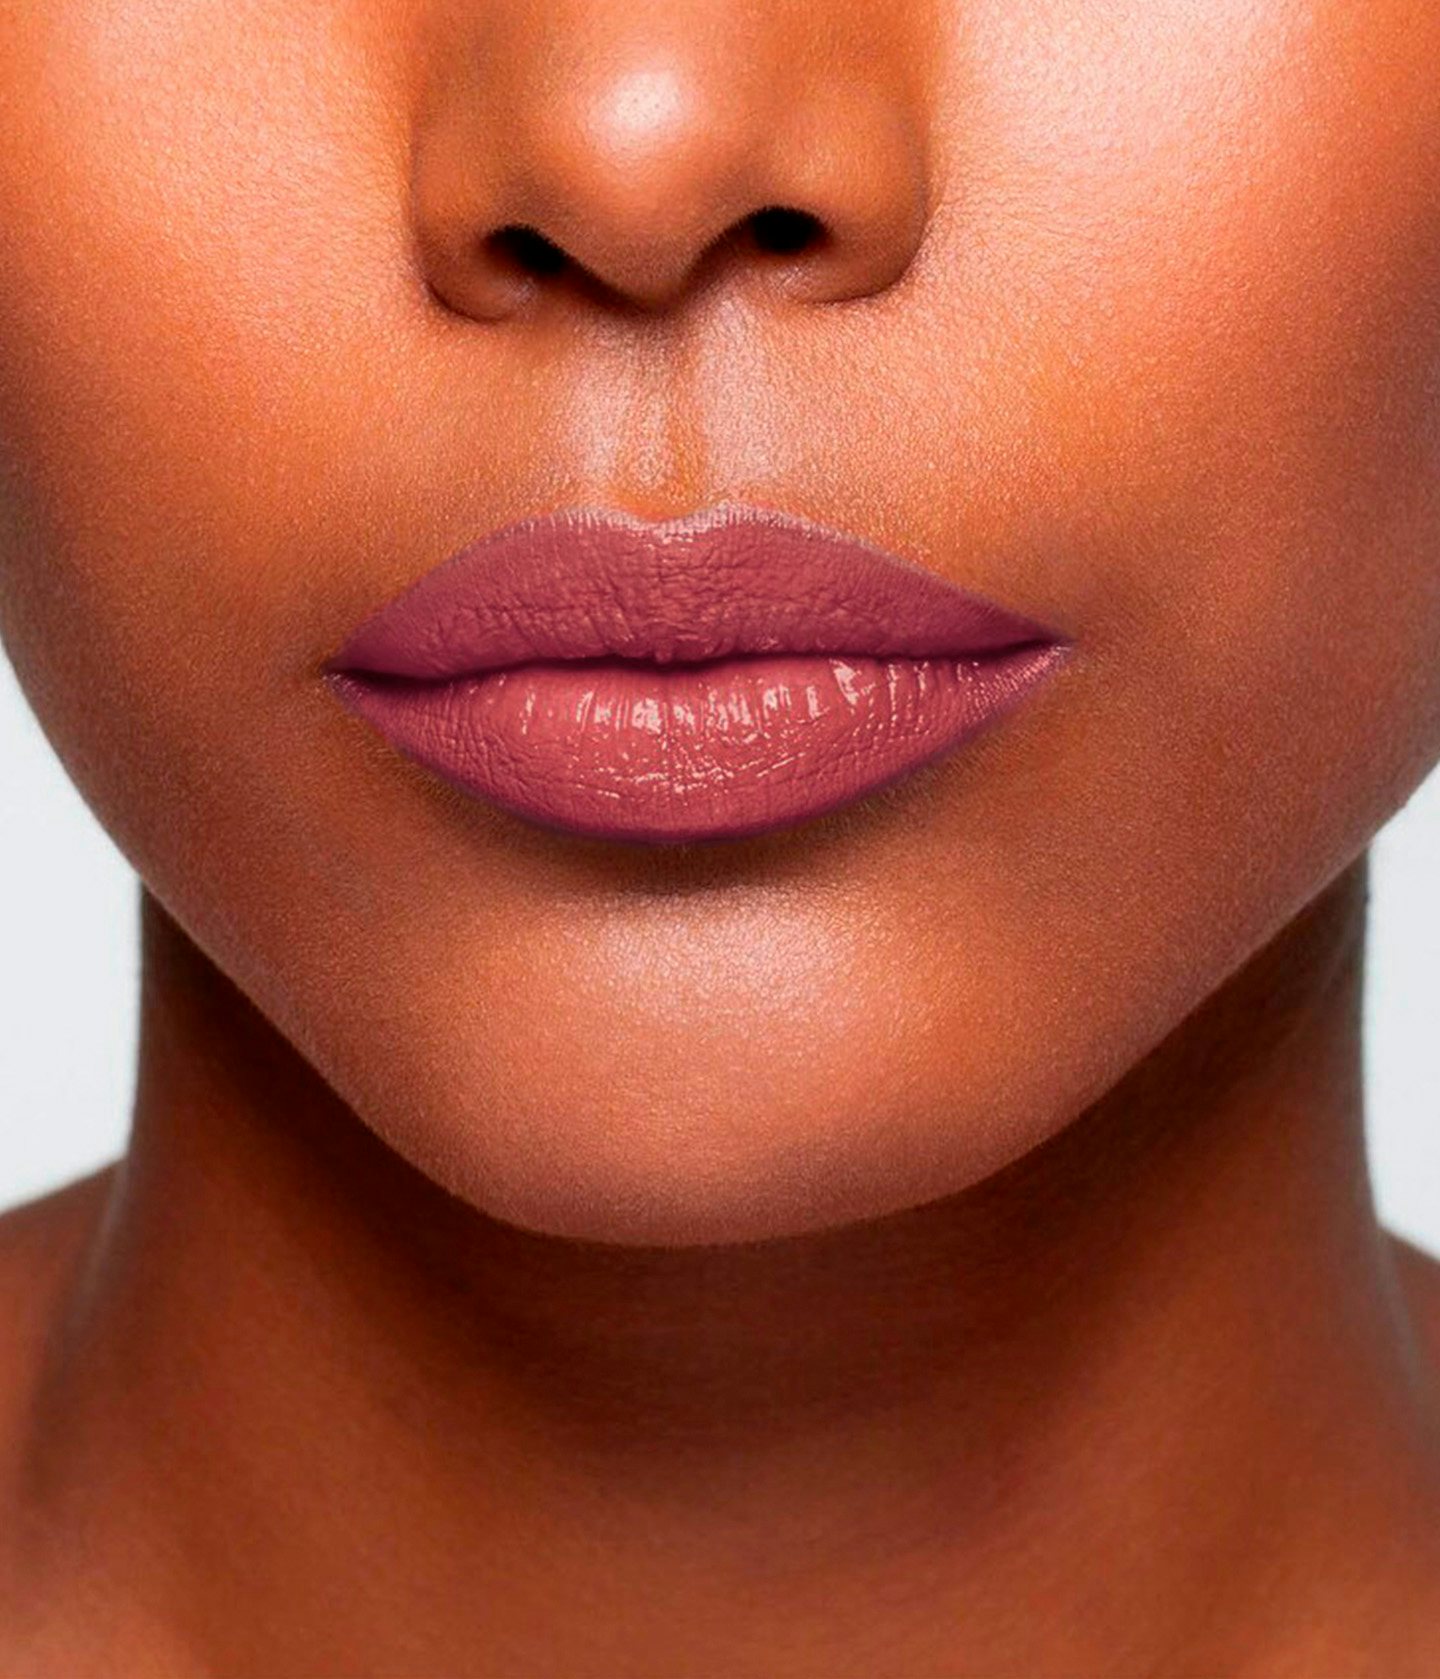 La bouche rouge Le Baume Kelly lipstick shade on the lips of a dark skin model